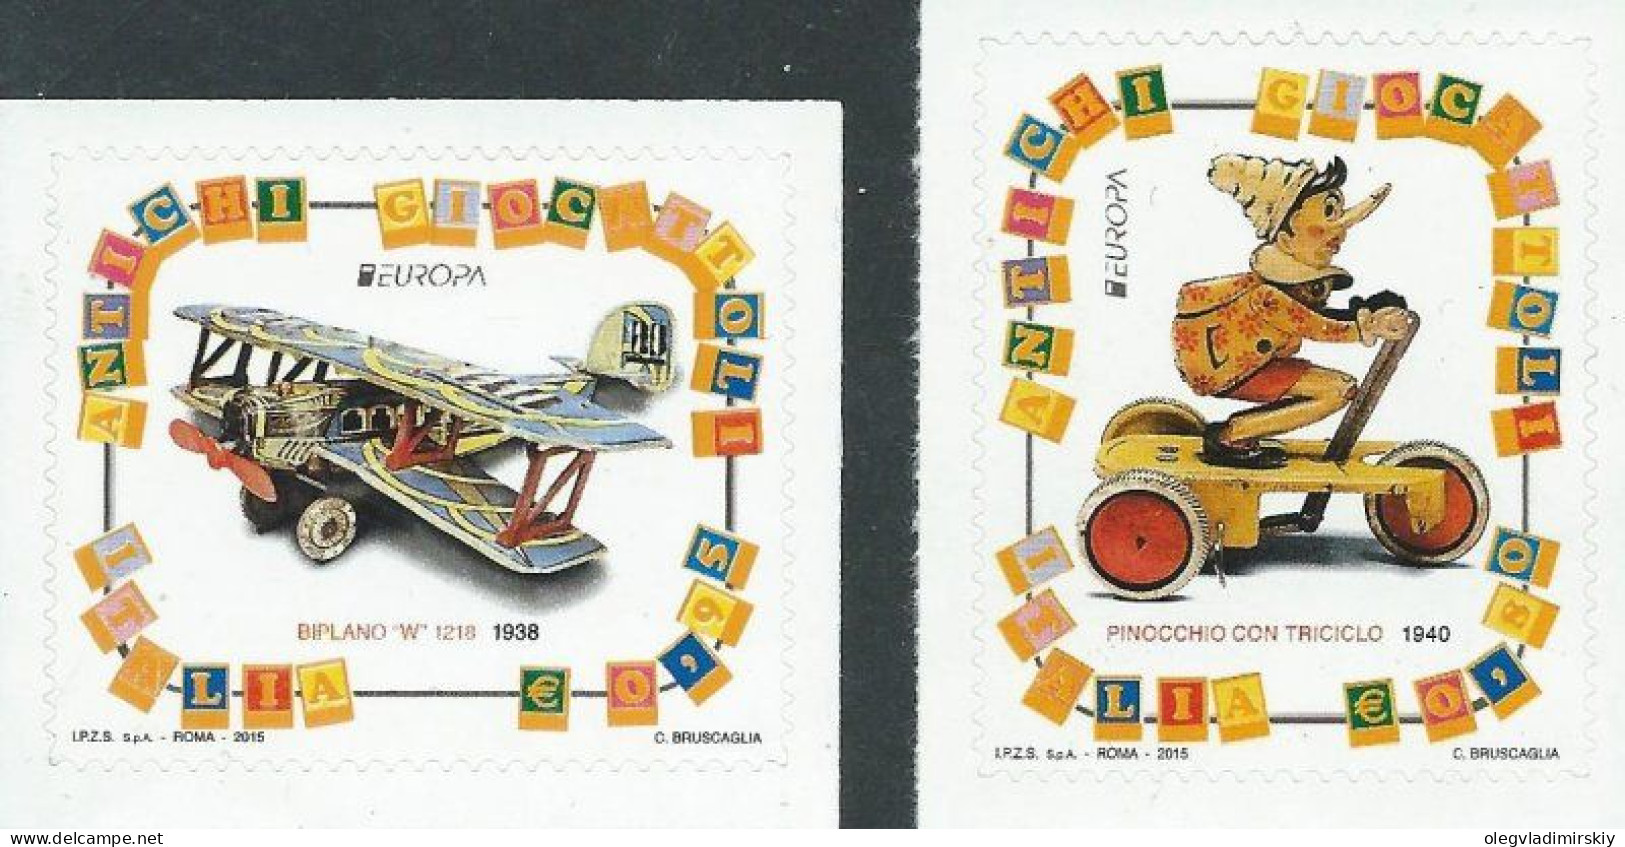 Italy Italia 2015 Europa CEPT Old Toys Set Of 2 Stamps MNH - 2011-20: Neufs